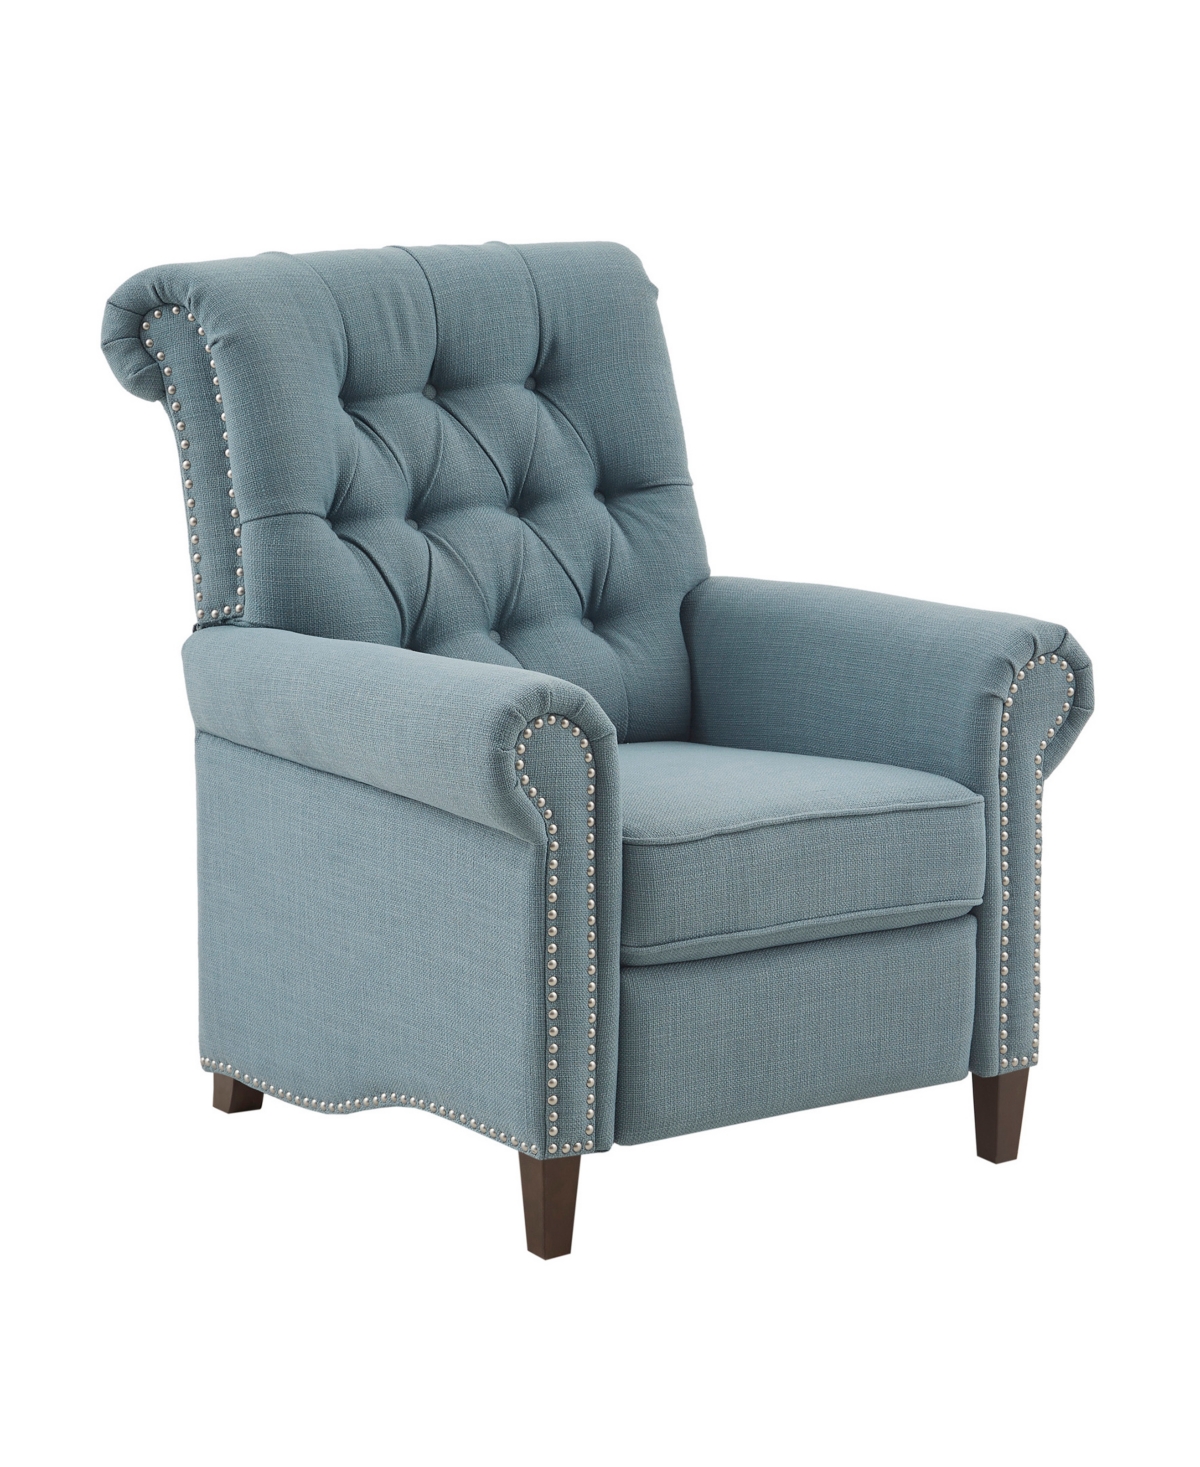 Madison Park Aidan 32.25" Fabric Upholstered Recliner In Blue